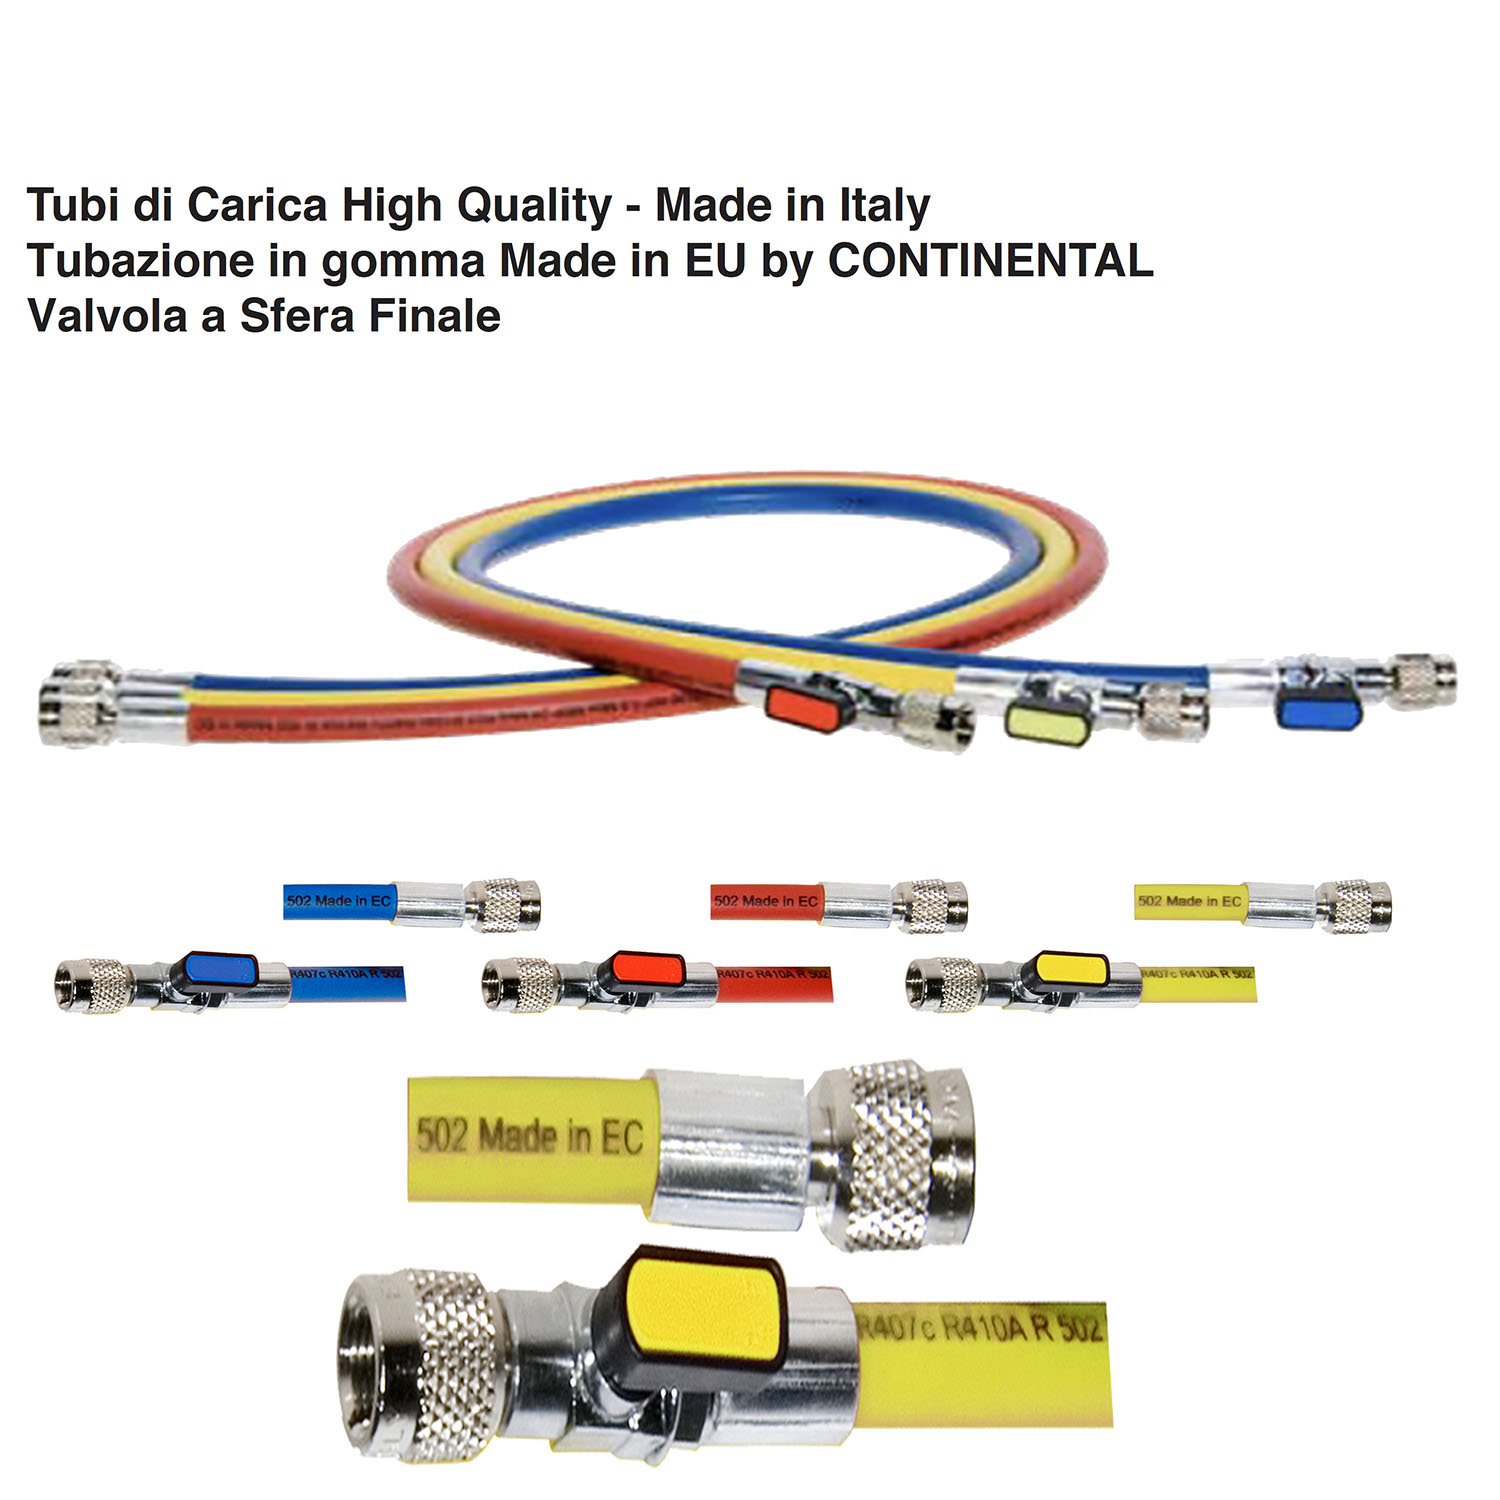 3 Charging Hoses 1/4 SAE J2196 - 200 cm. (MADE IN ITALY high quality - hose original Continental) with Ball Valve BLUE+RED+YELLOW